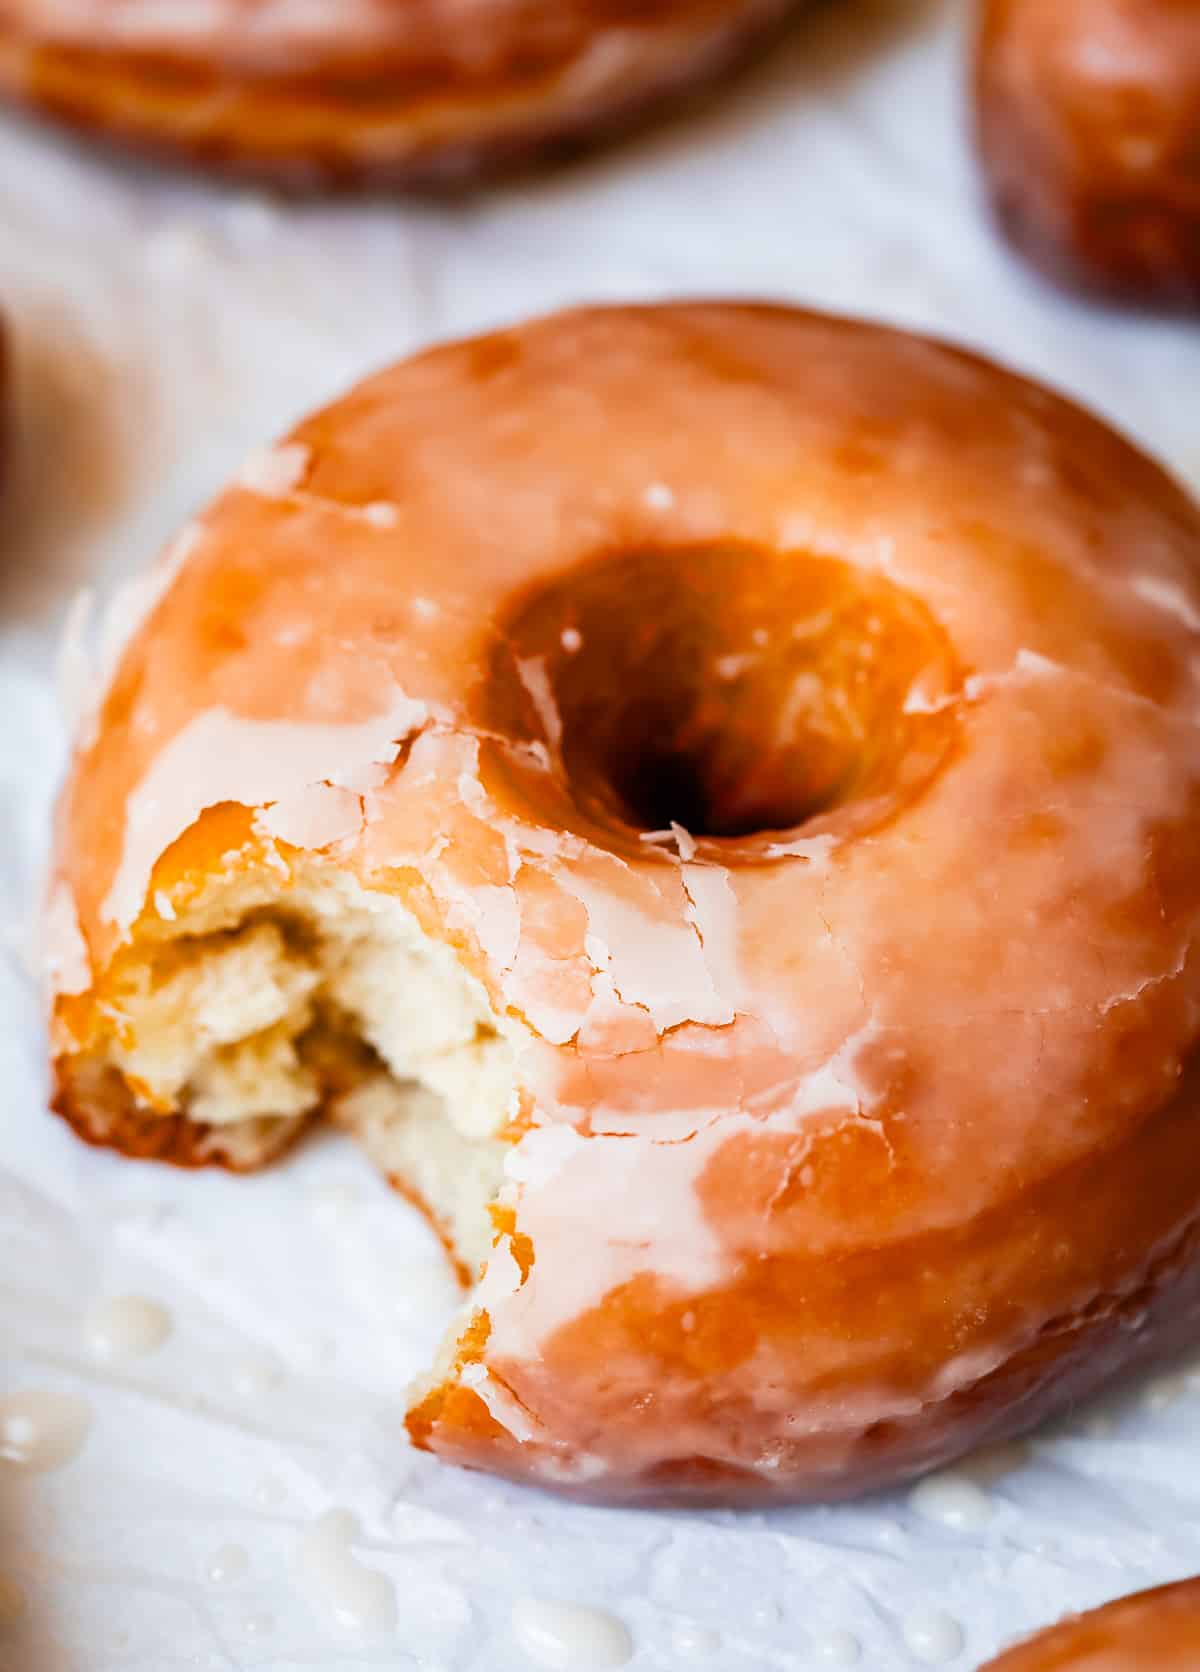 homemade glazed donut with a bite taken out of it on parchment paper.